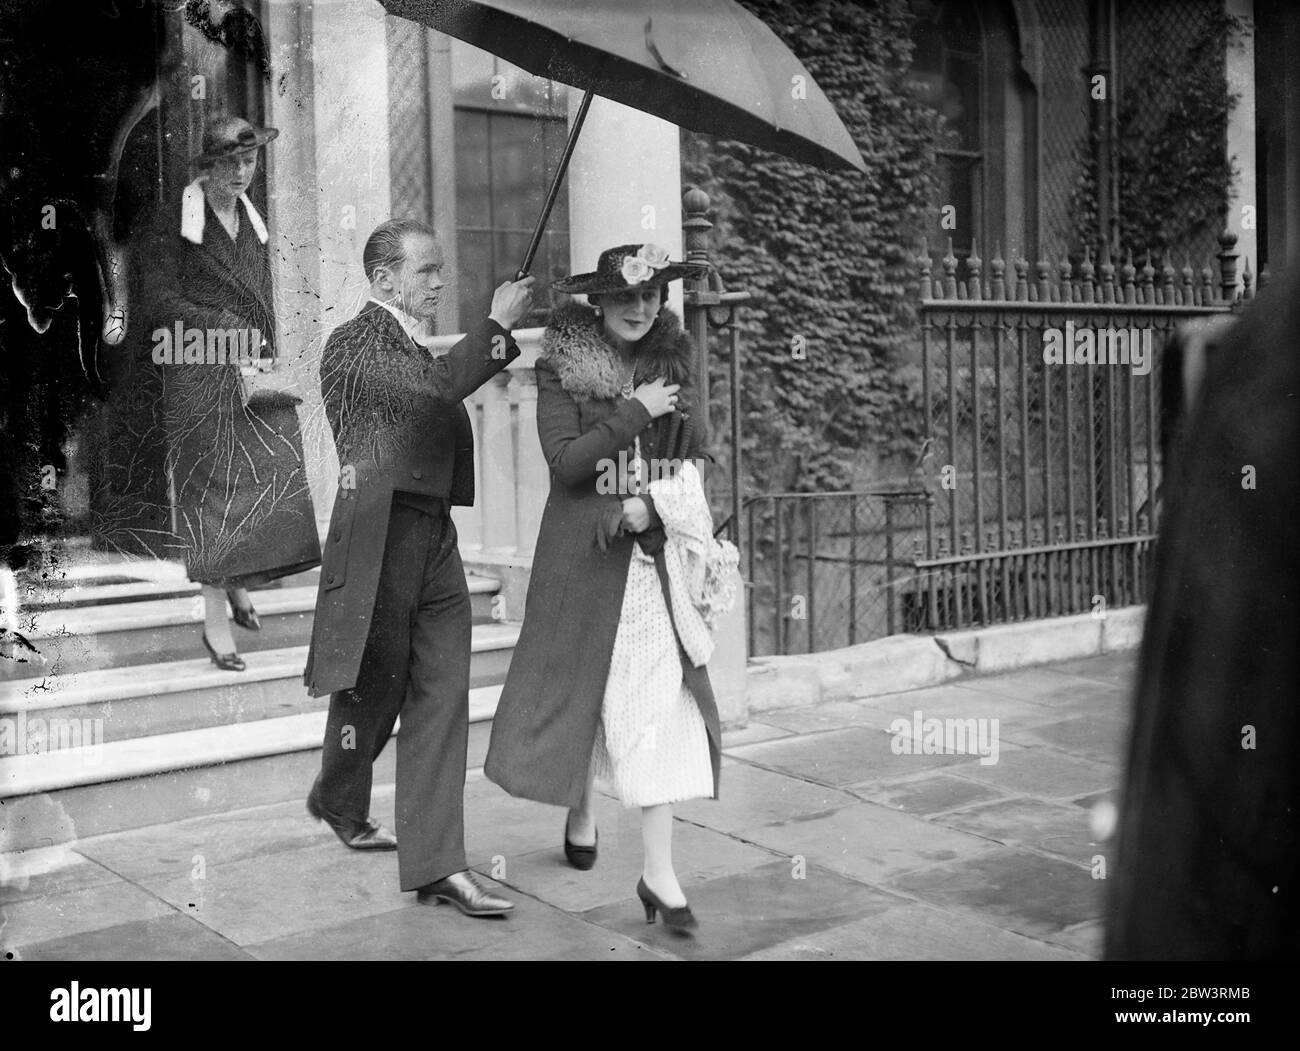 Duchess of Kent leaves Belgrave Square for Tyneside . The Duchess of Kent left 3 , Belgrave Square for her visit to Tyneside where she will launch the cruiser HMS Sheeld from the Walker Naval Yard of Vickers Armstrong Ltd . Photo shows , the Duchess of Kent leaving 3 , Belgrave Square , under an umbrella accompanied by Lady Mary Hope , her Lady in Law who is to marry Lord Herbert next Monday . 23 July 1936 Stock Photo